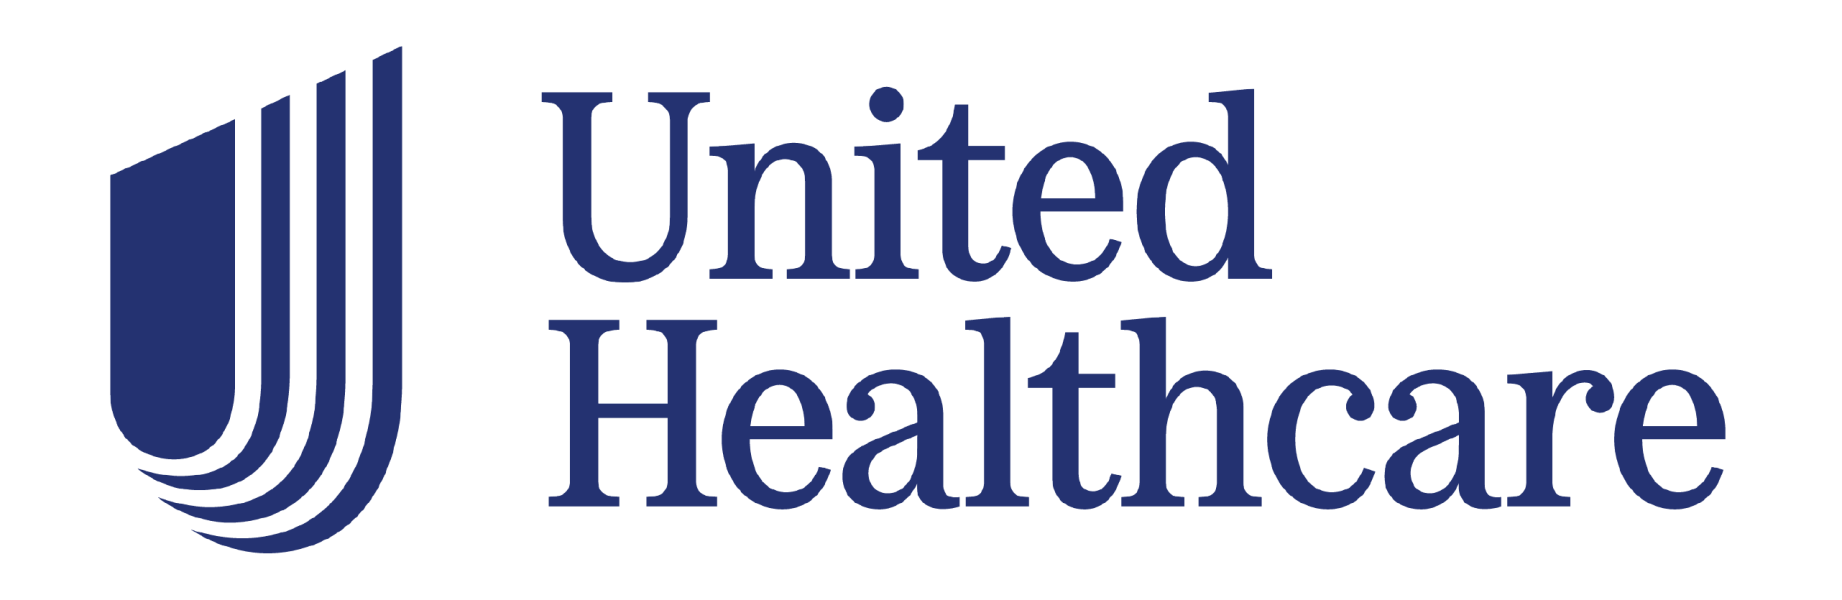 Visit United Healthcare's website by clicking the logo